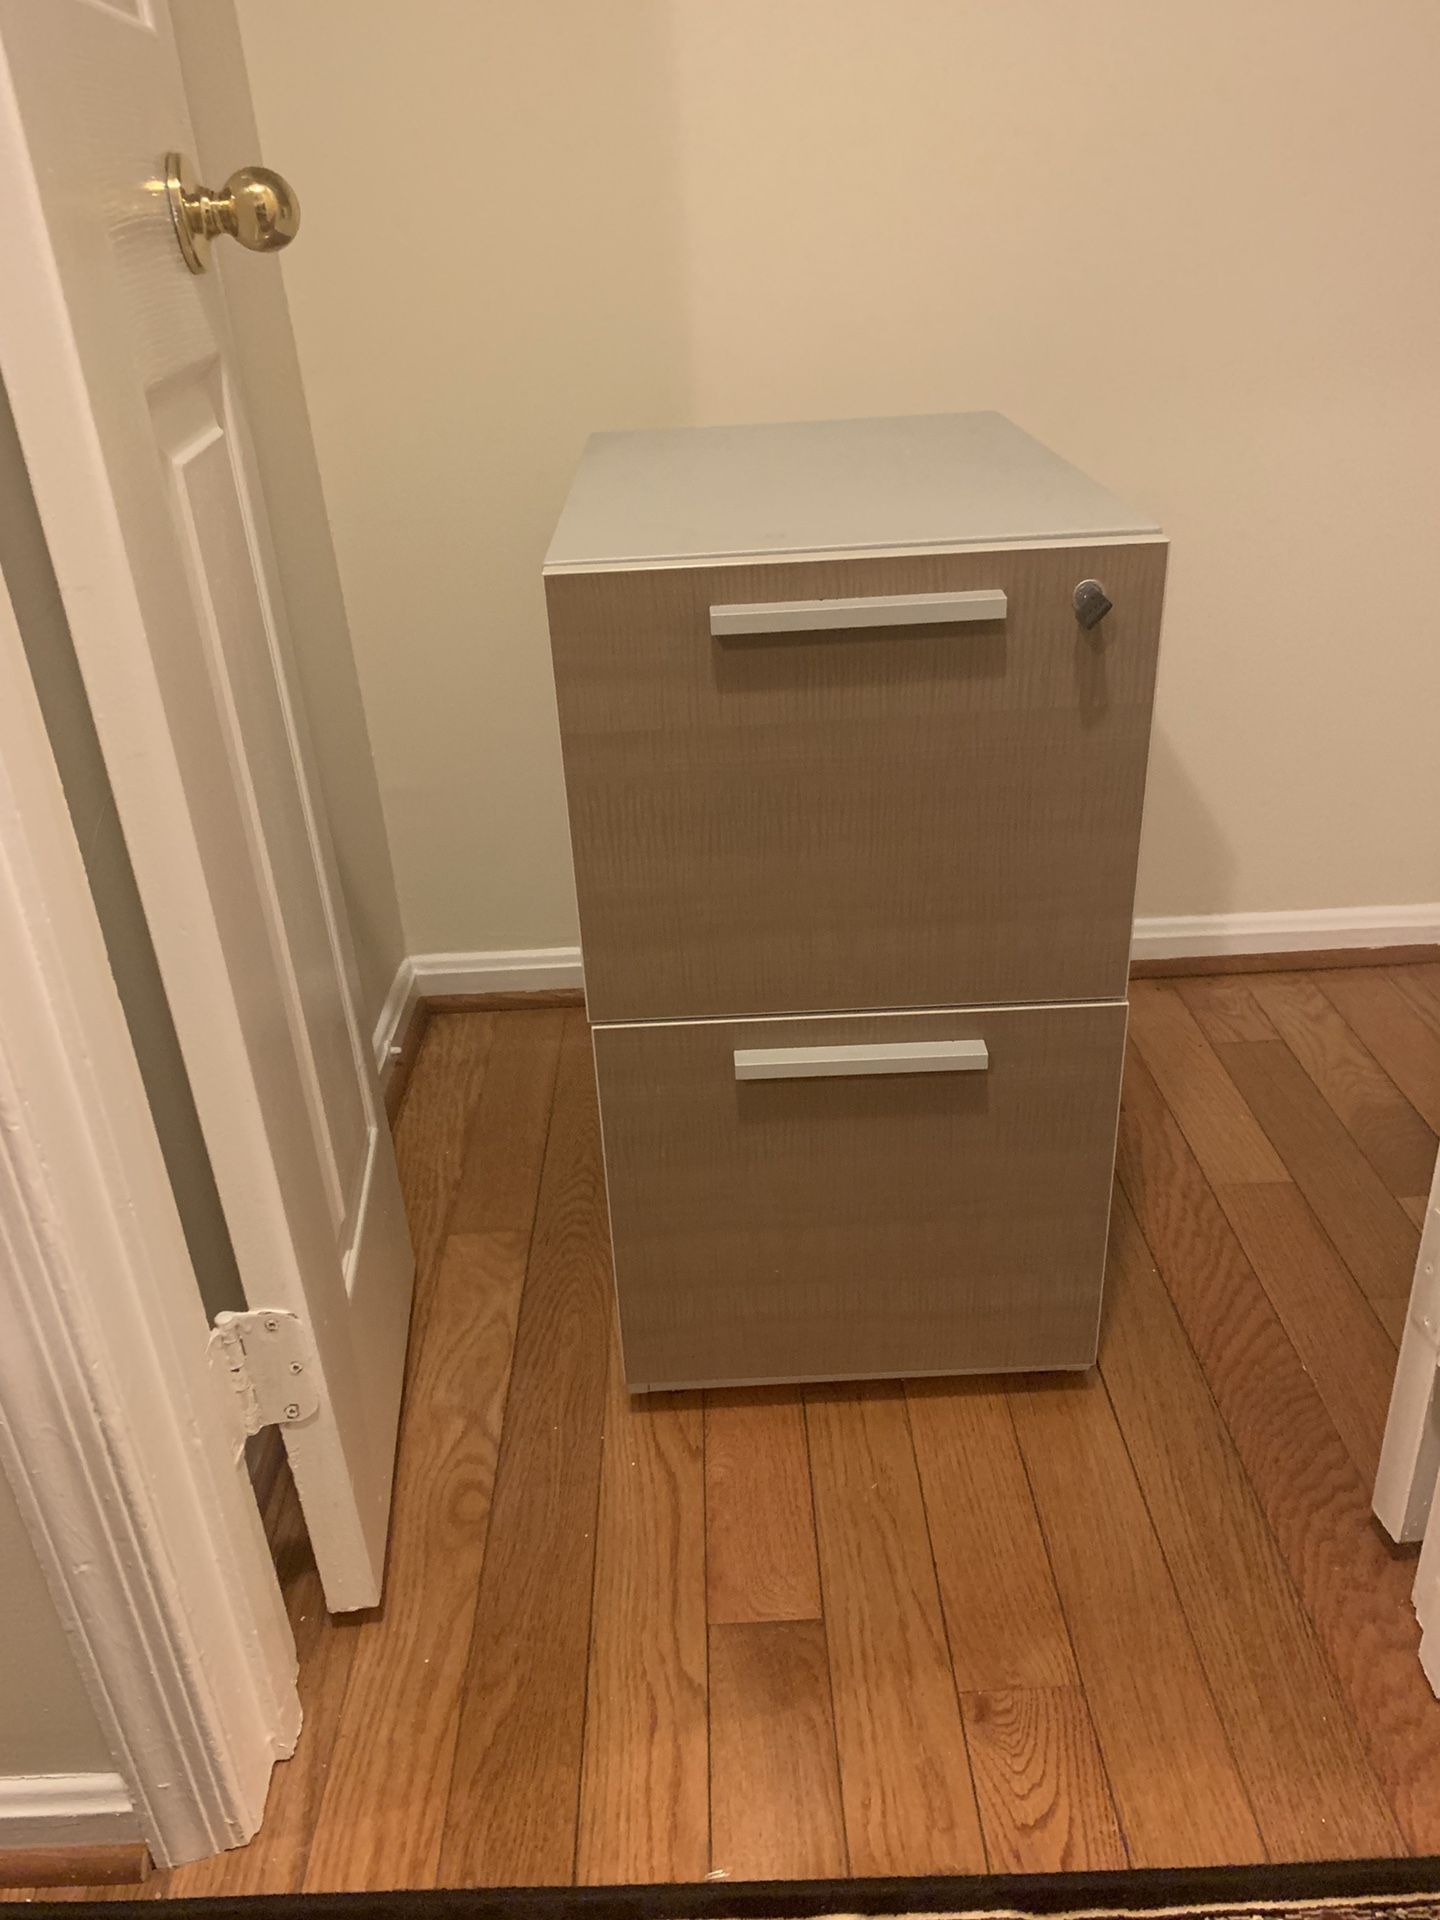 Metal filing cabinet with two drawers in good condition.